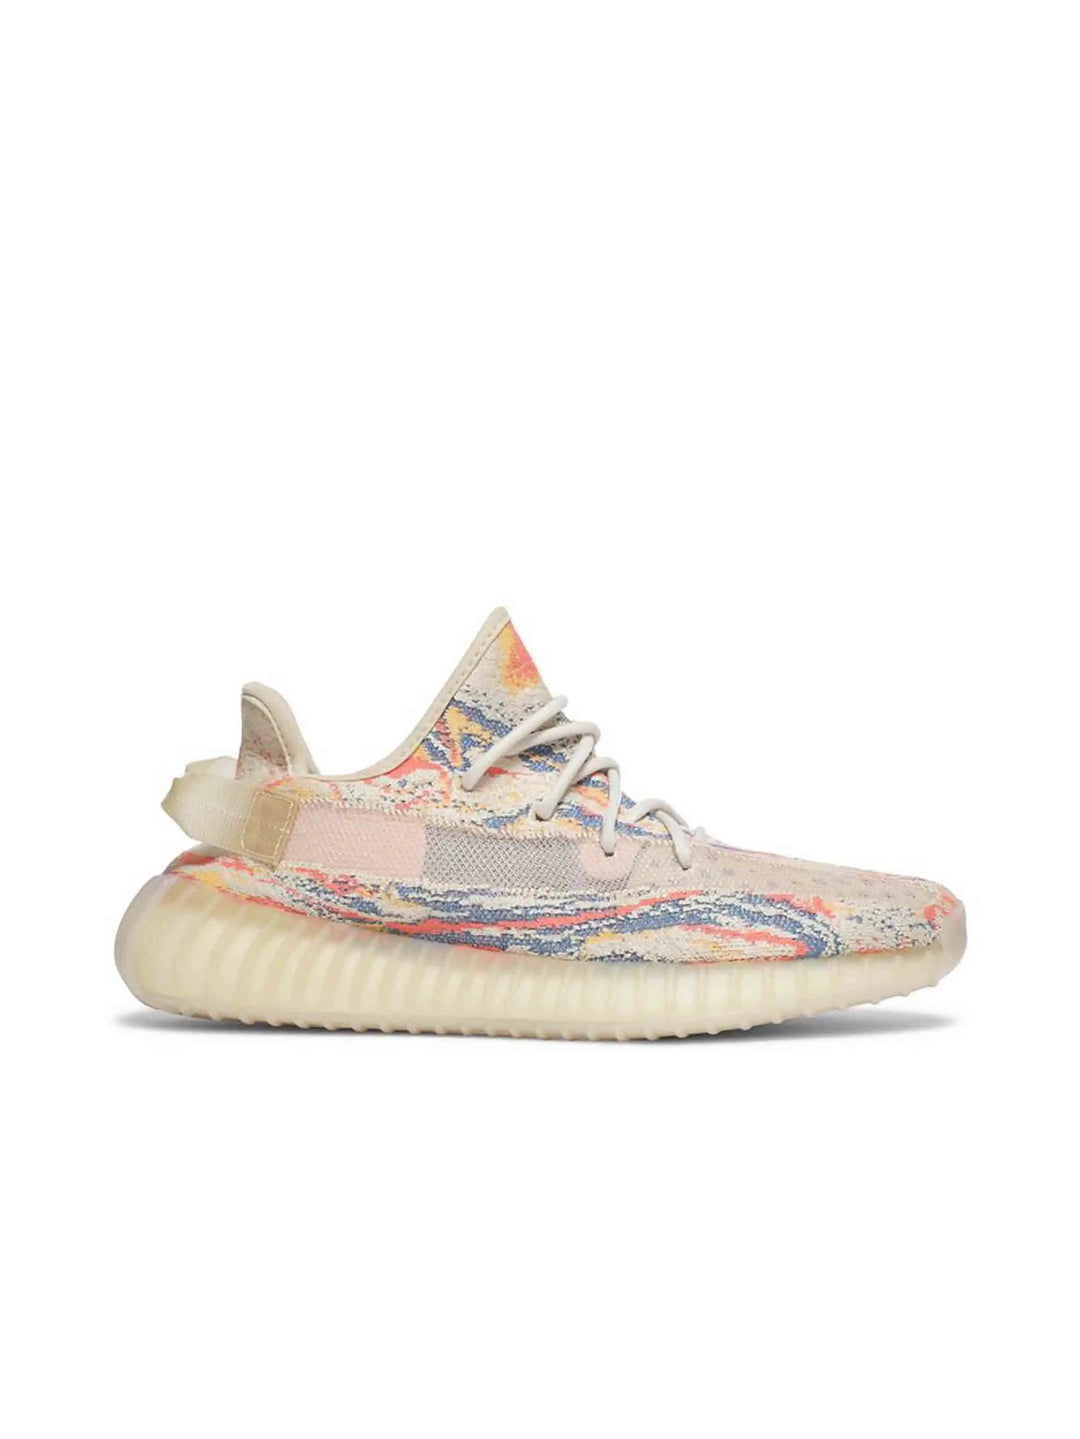 adidas Yeezy Boost 350 V2 MX Oat in Auckland, New Zealand - Shop name